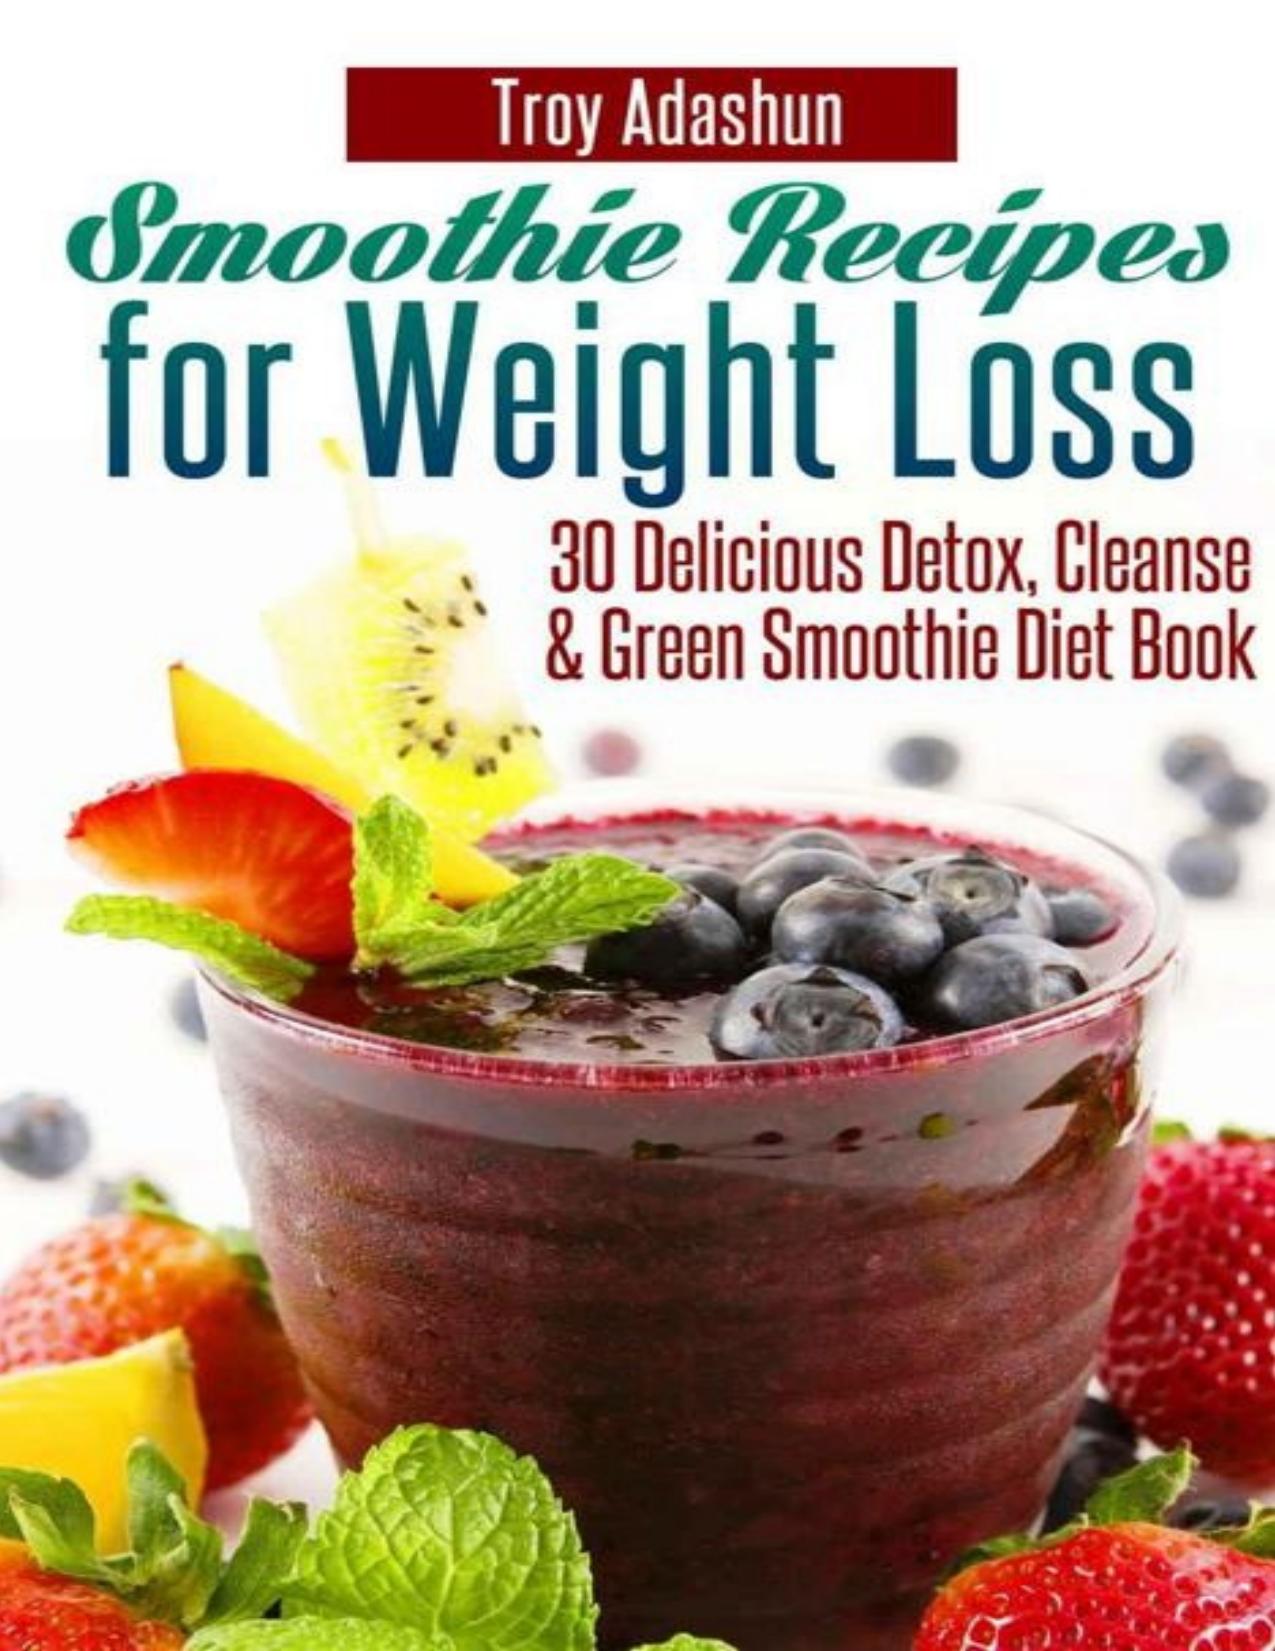 Smoothie Recipes for Weight Loss - 30 Delicious Detox, Cleanse and Green Smoothie Diet Book - PDFDrive.com